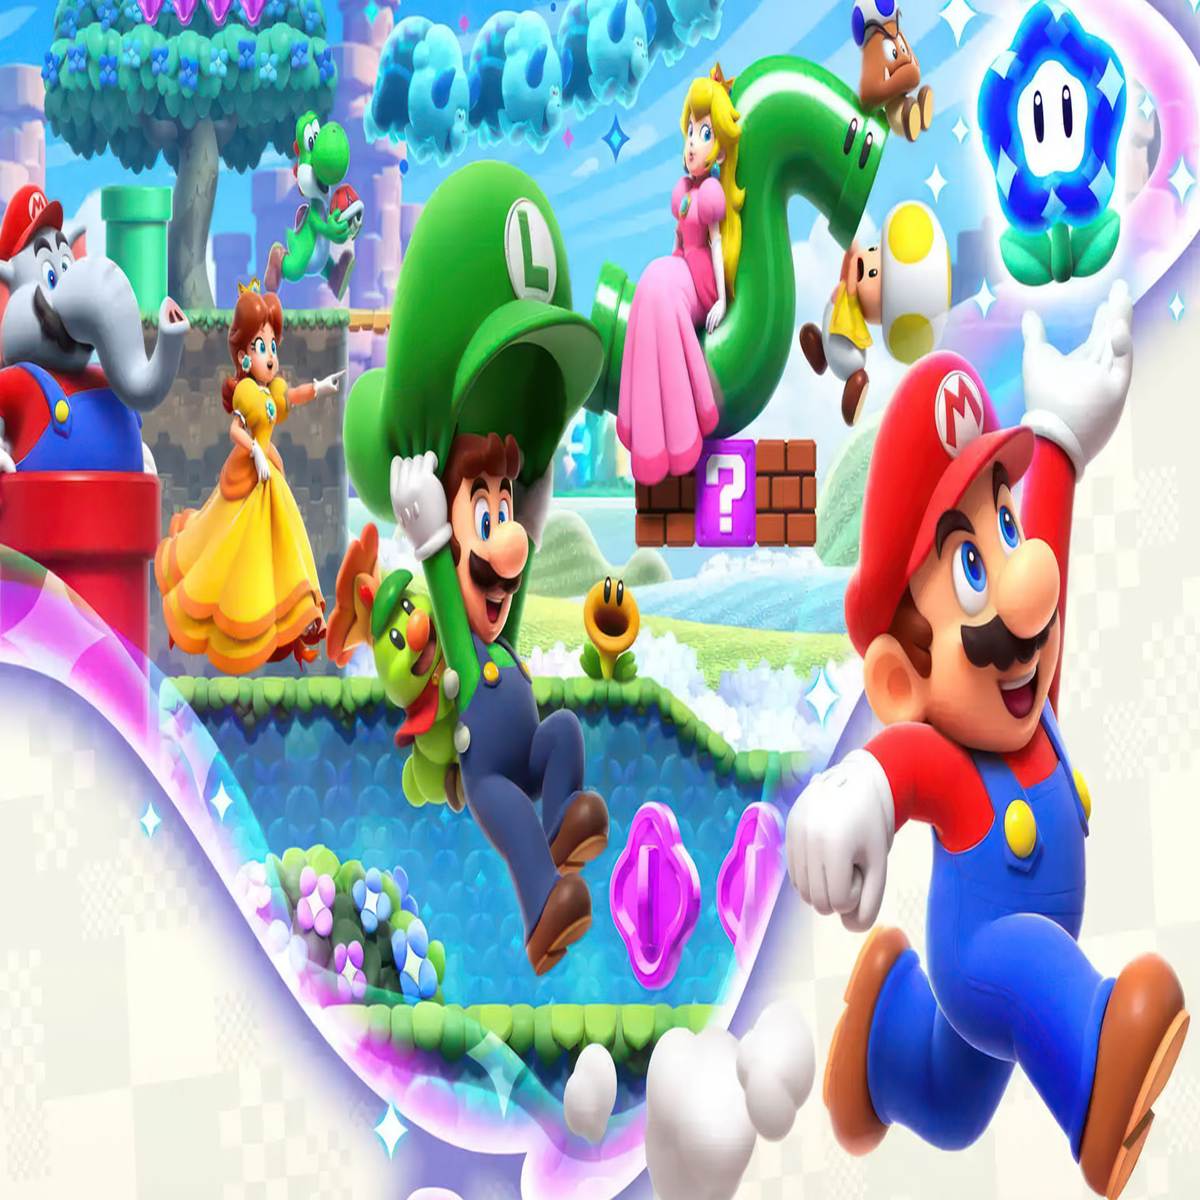 Super Mario Bros. Wonder Is A Whole New Approach To 2D Mario